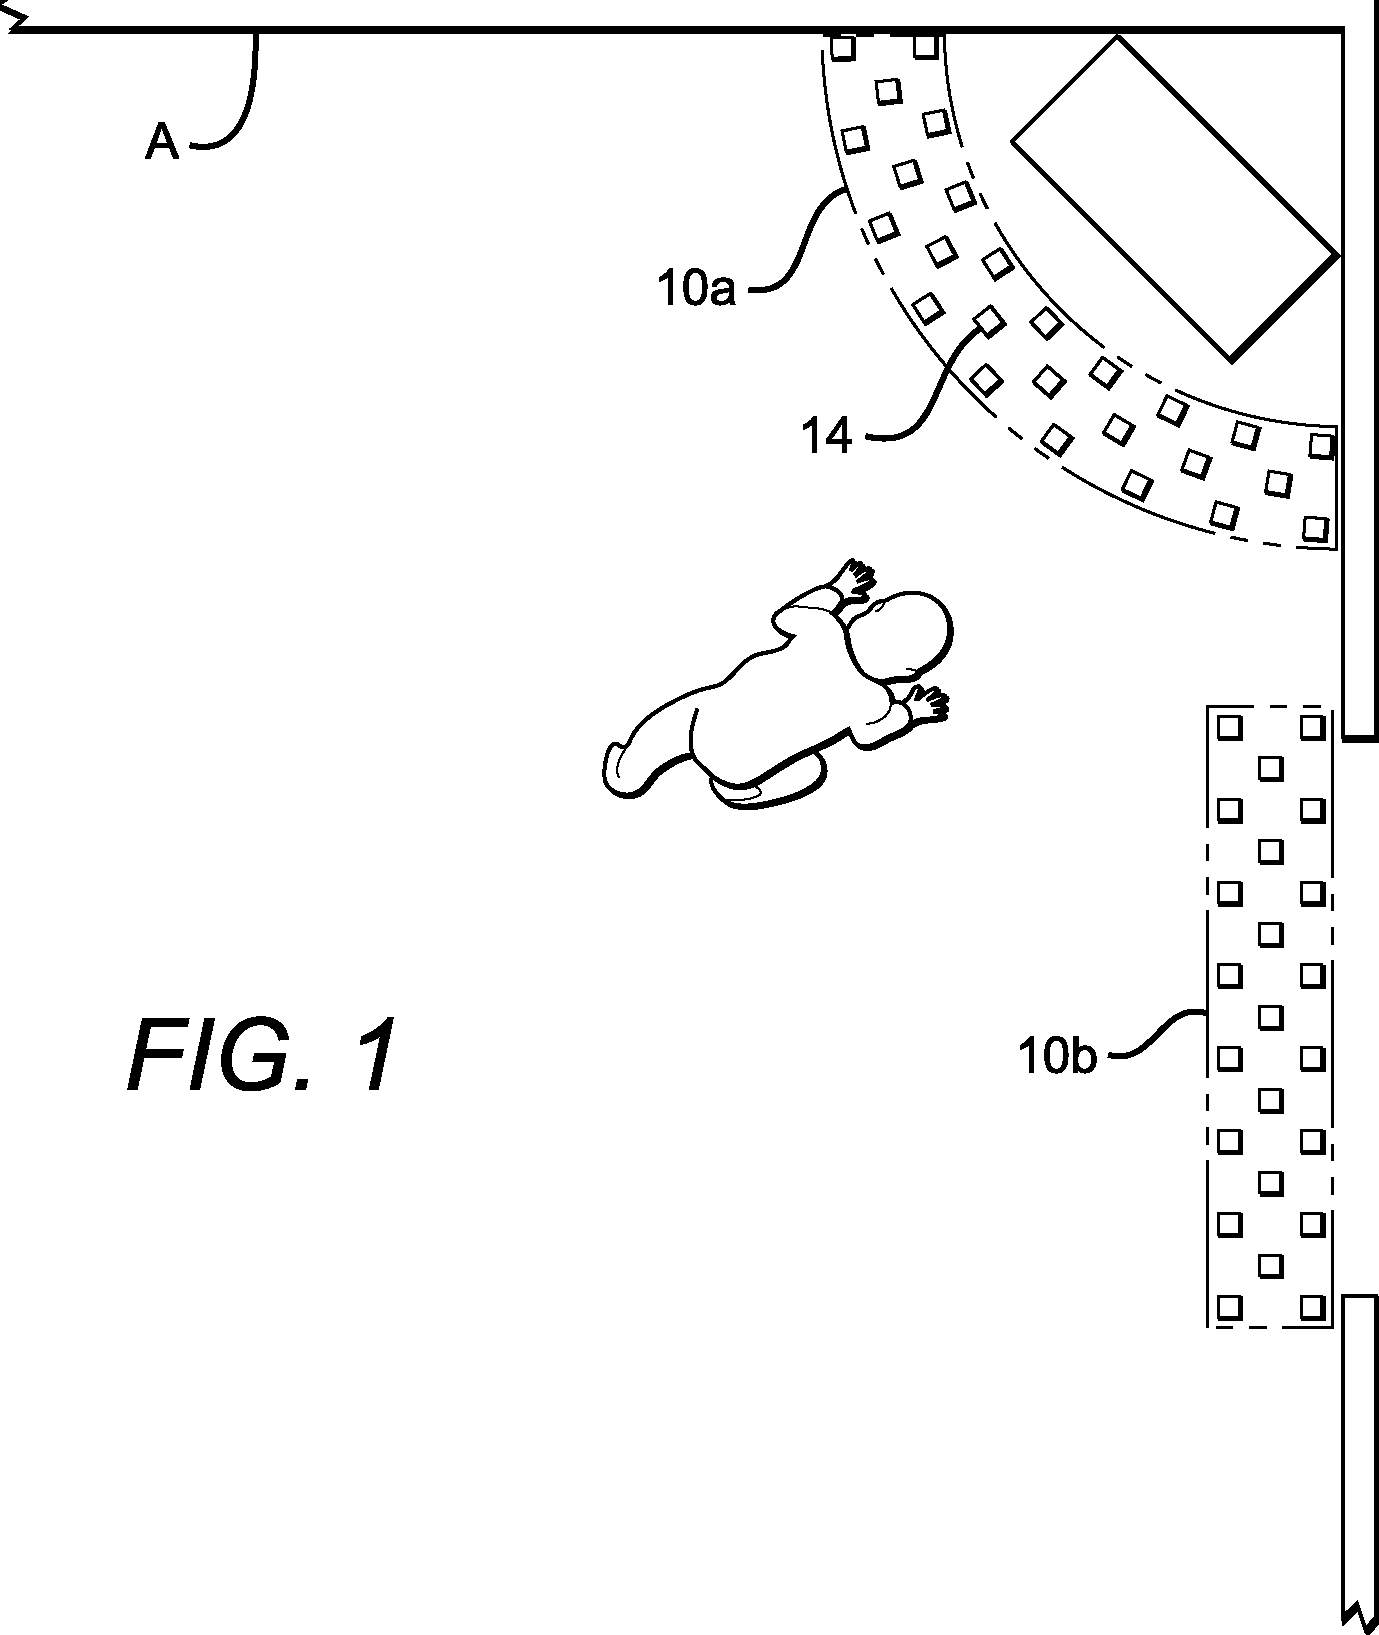 Method for limiting the movement of an infant in a particular direction